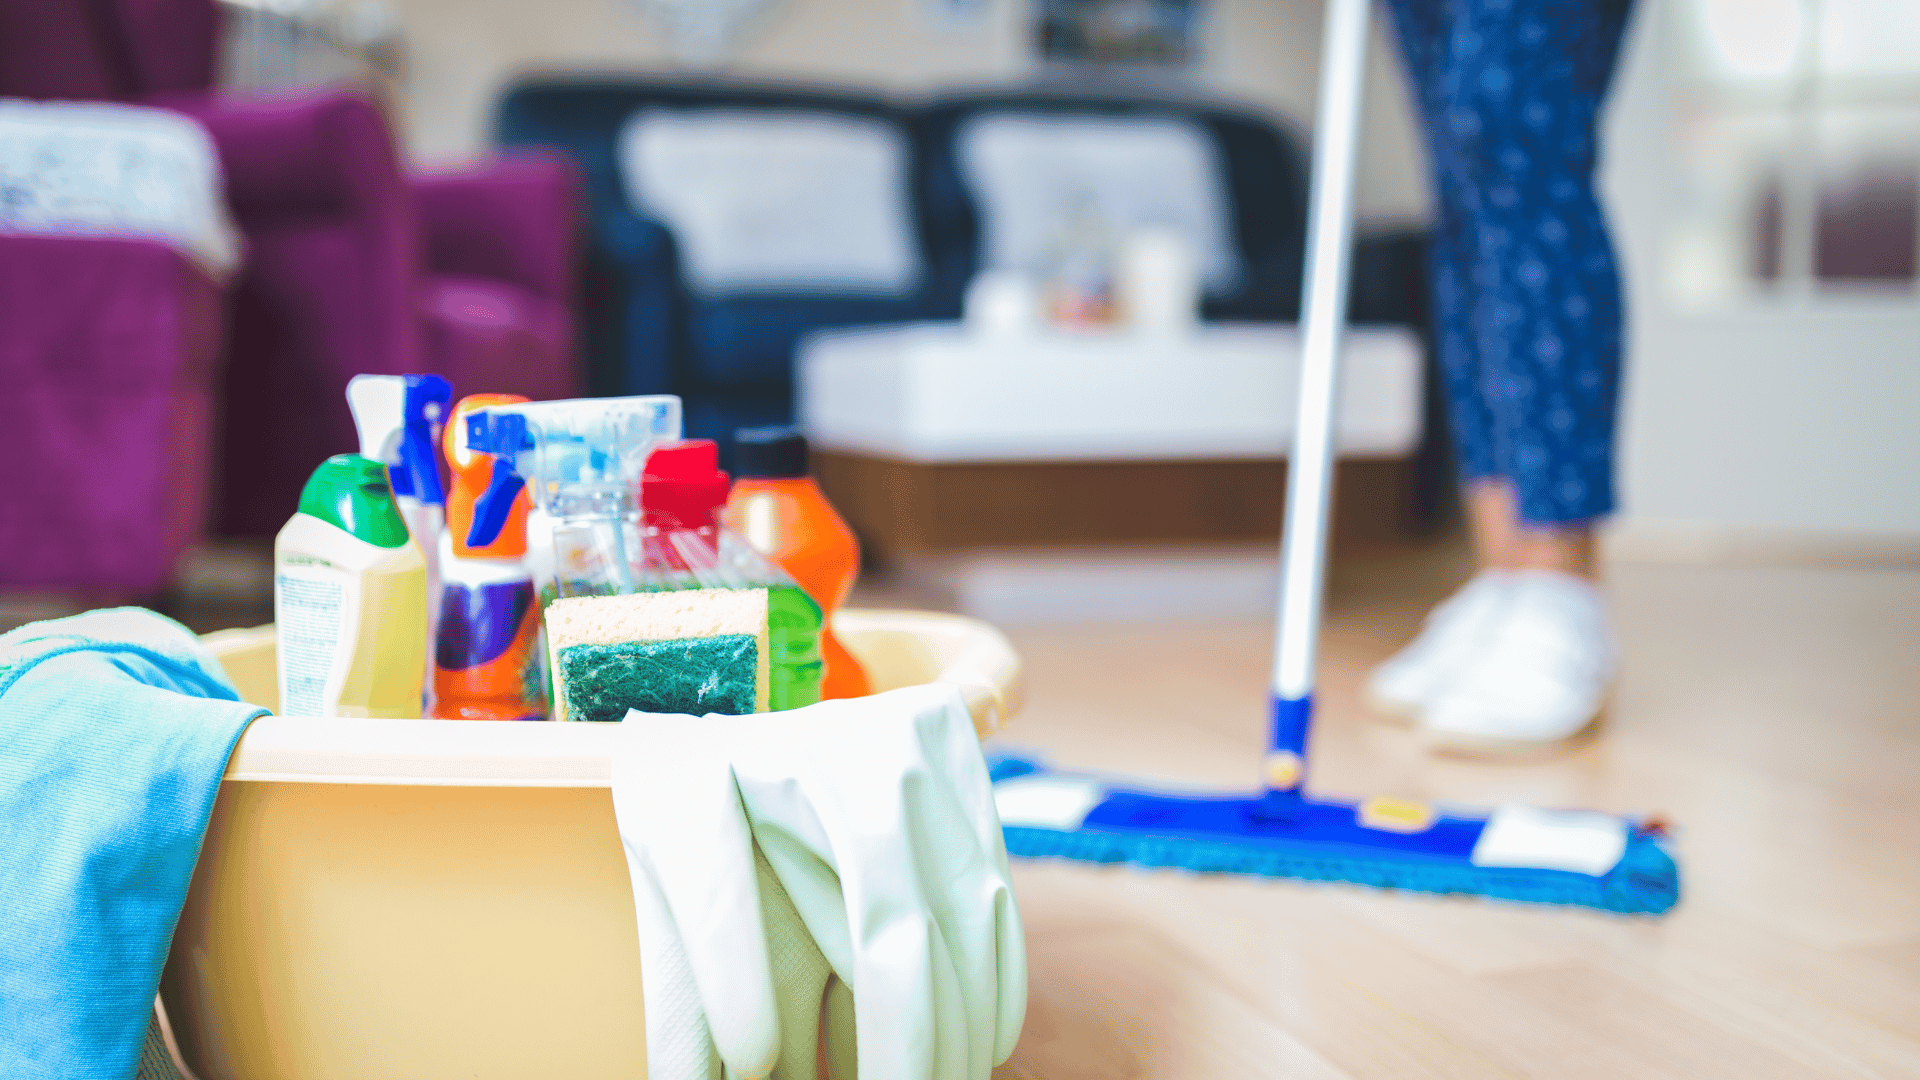 Prepare cleaning tools and any material items you may need for deep cleaning.